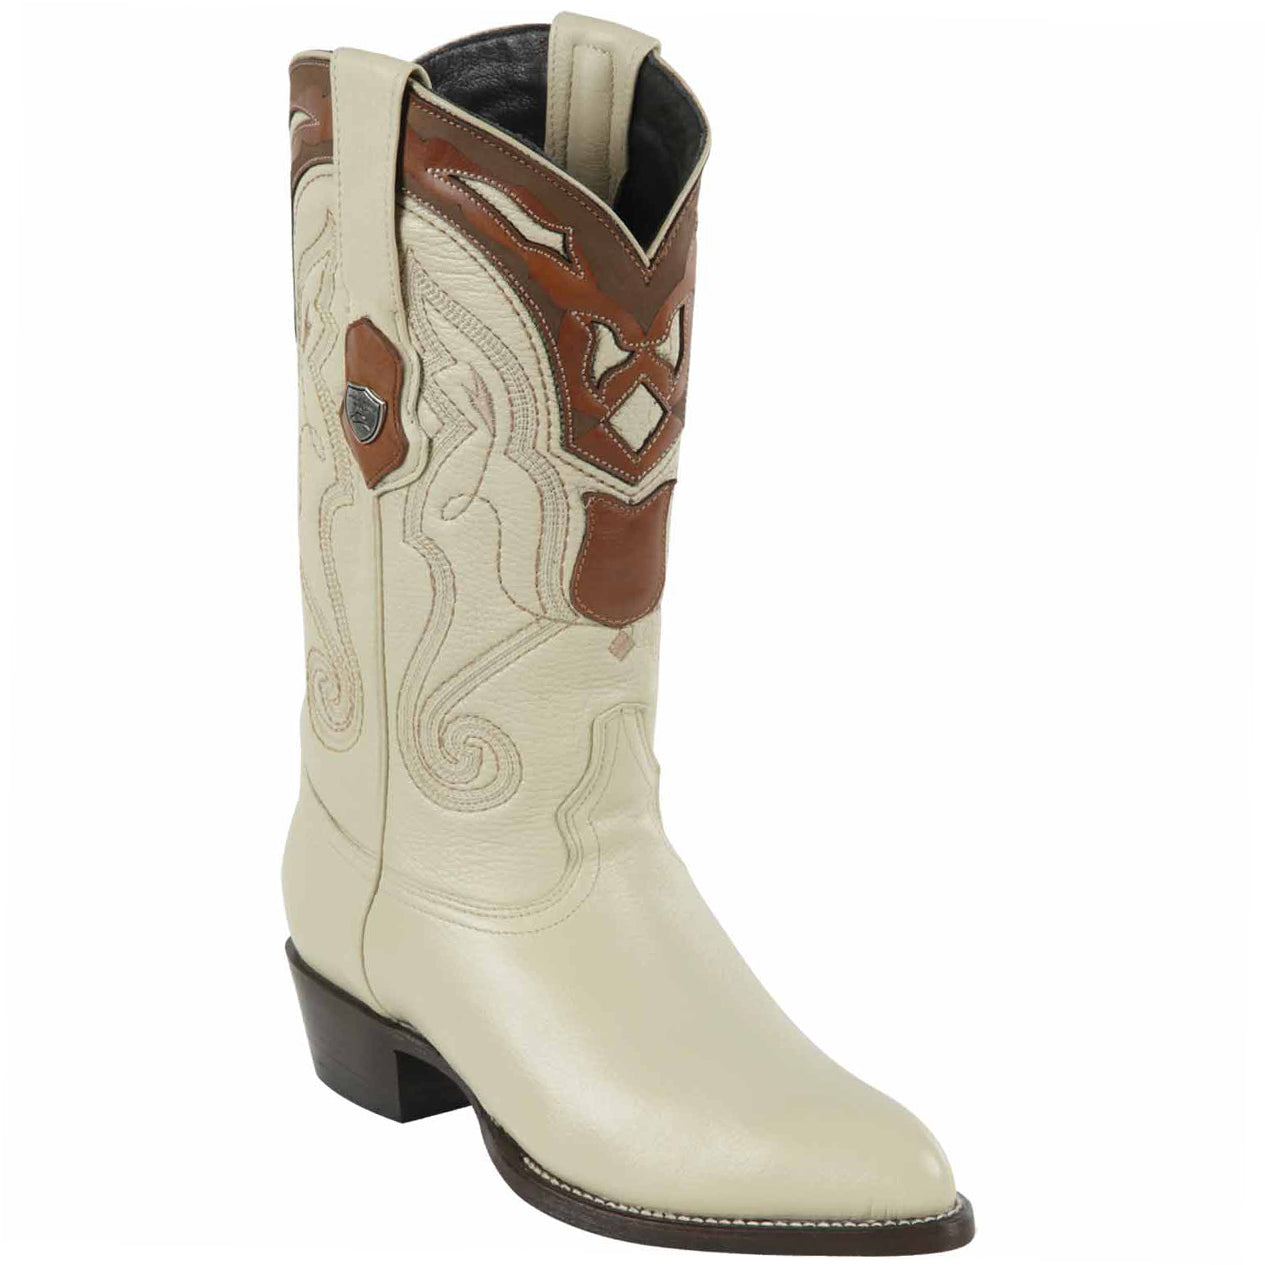 Wild West Boots - Winter White Cowboy Boots J-Toe